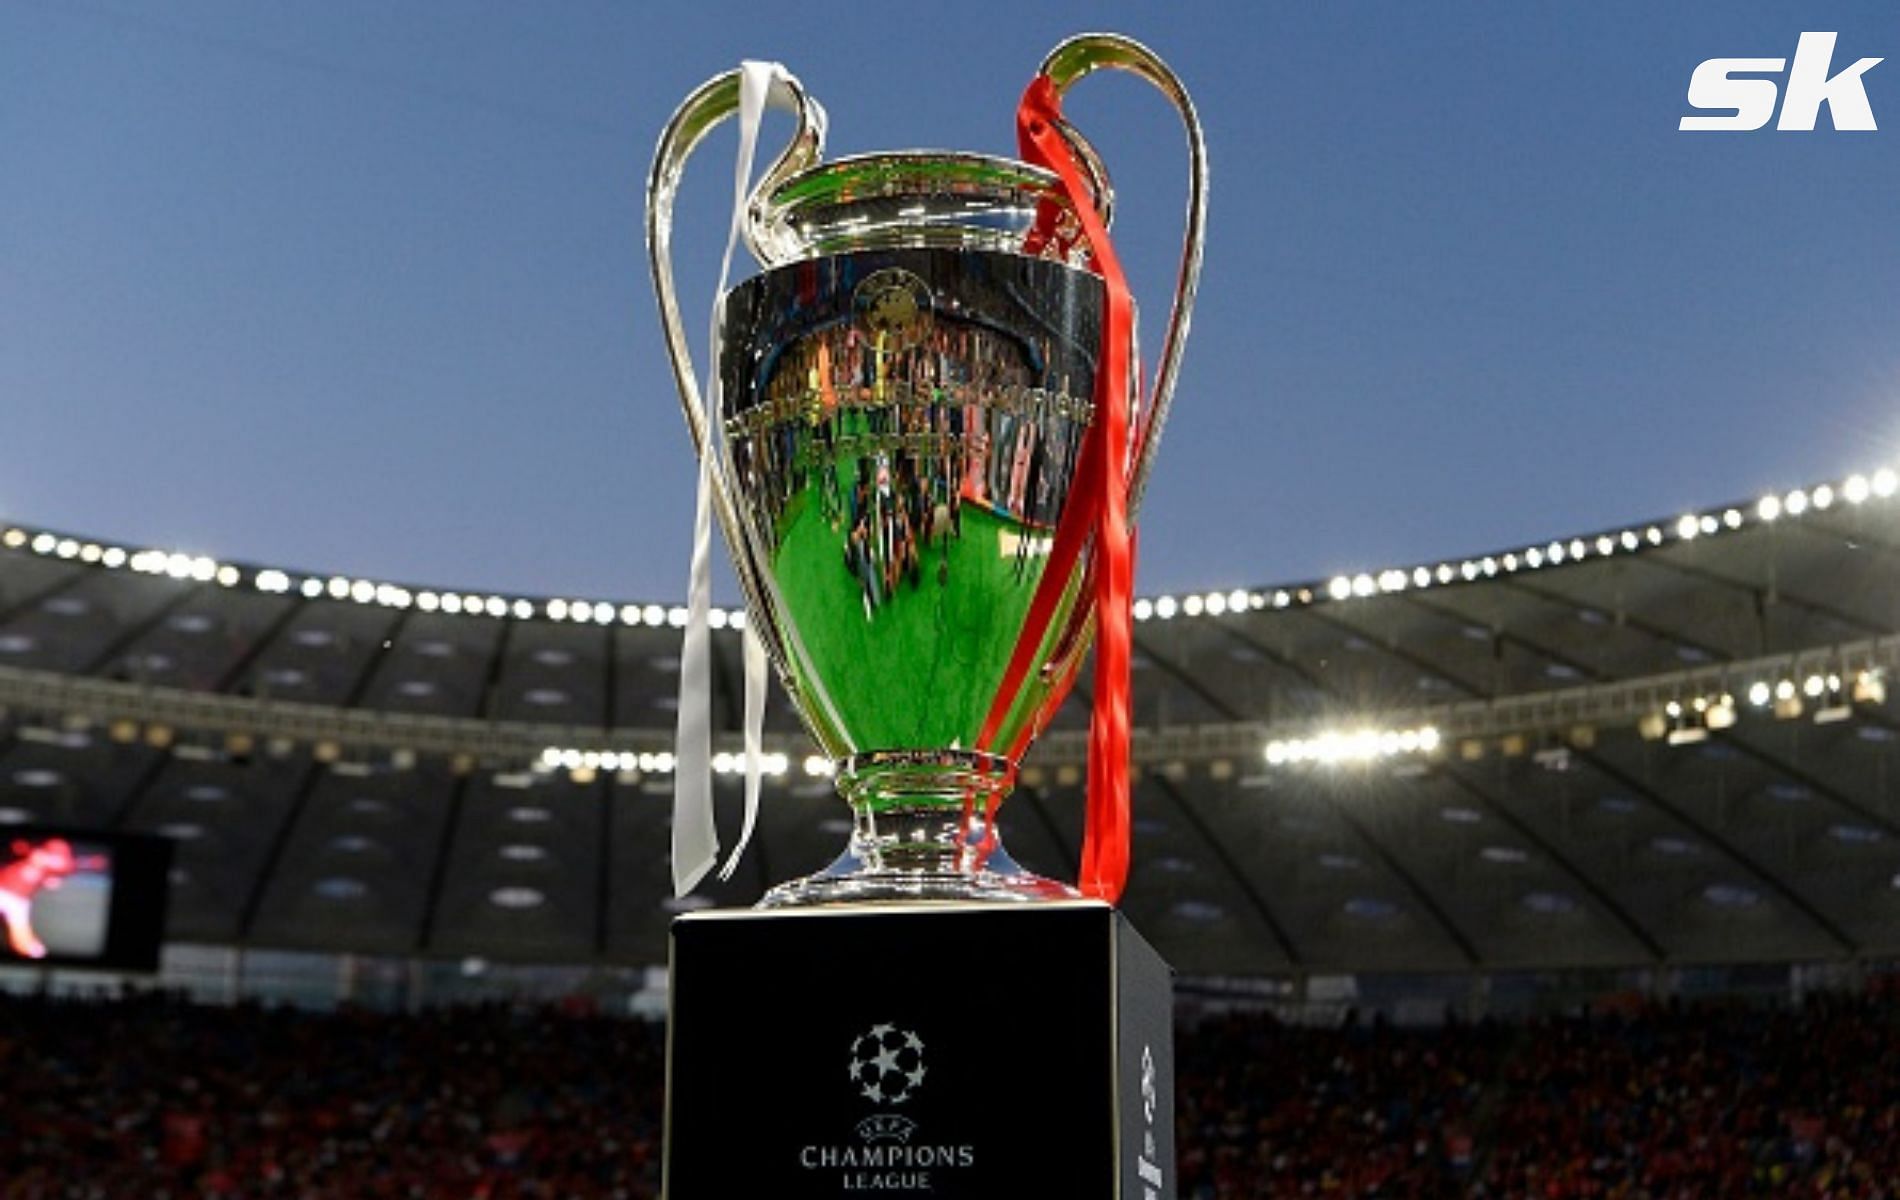 The Champions League 2021-22 is ready for the knockout stages